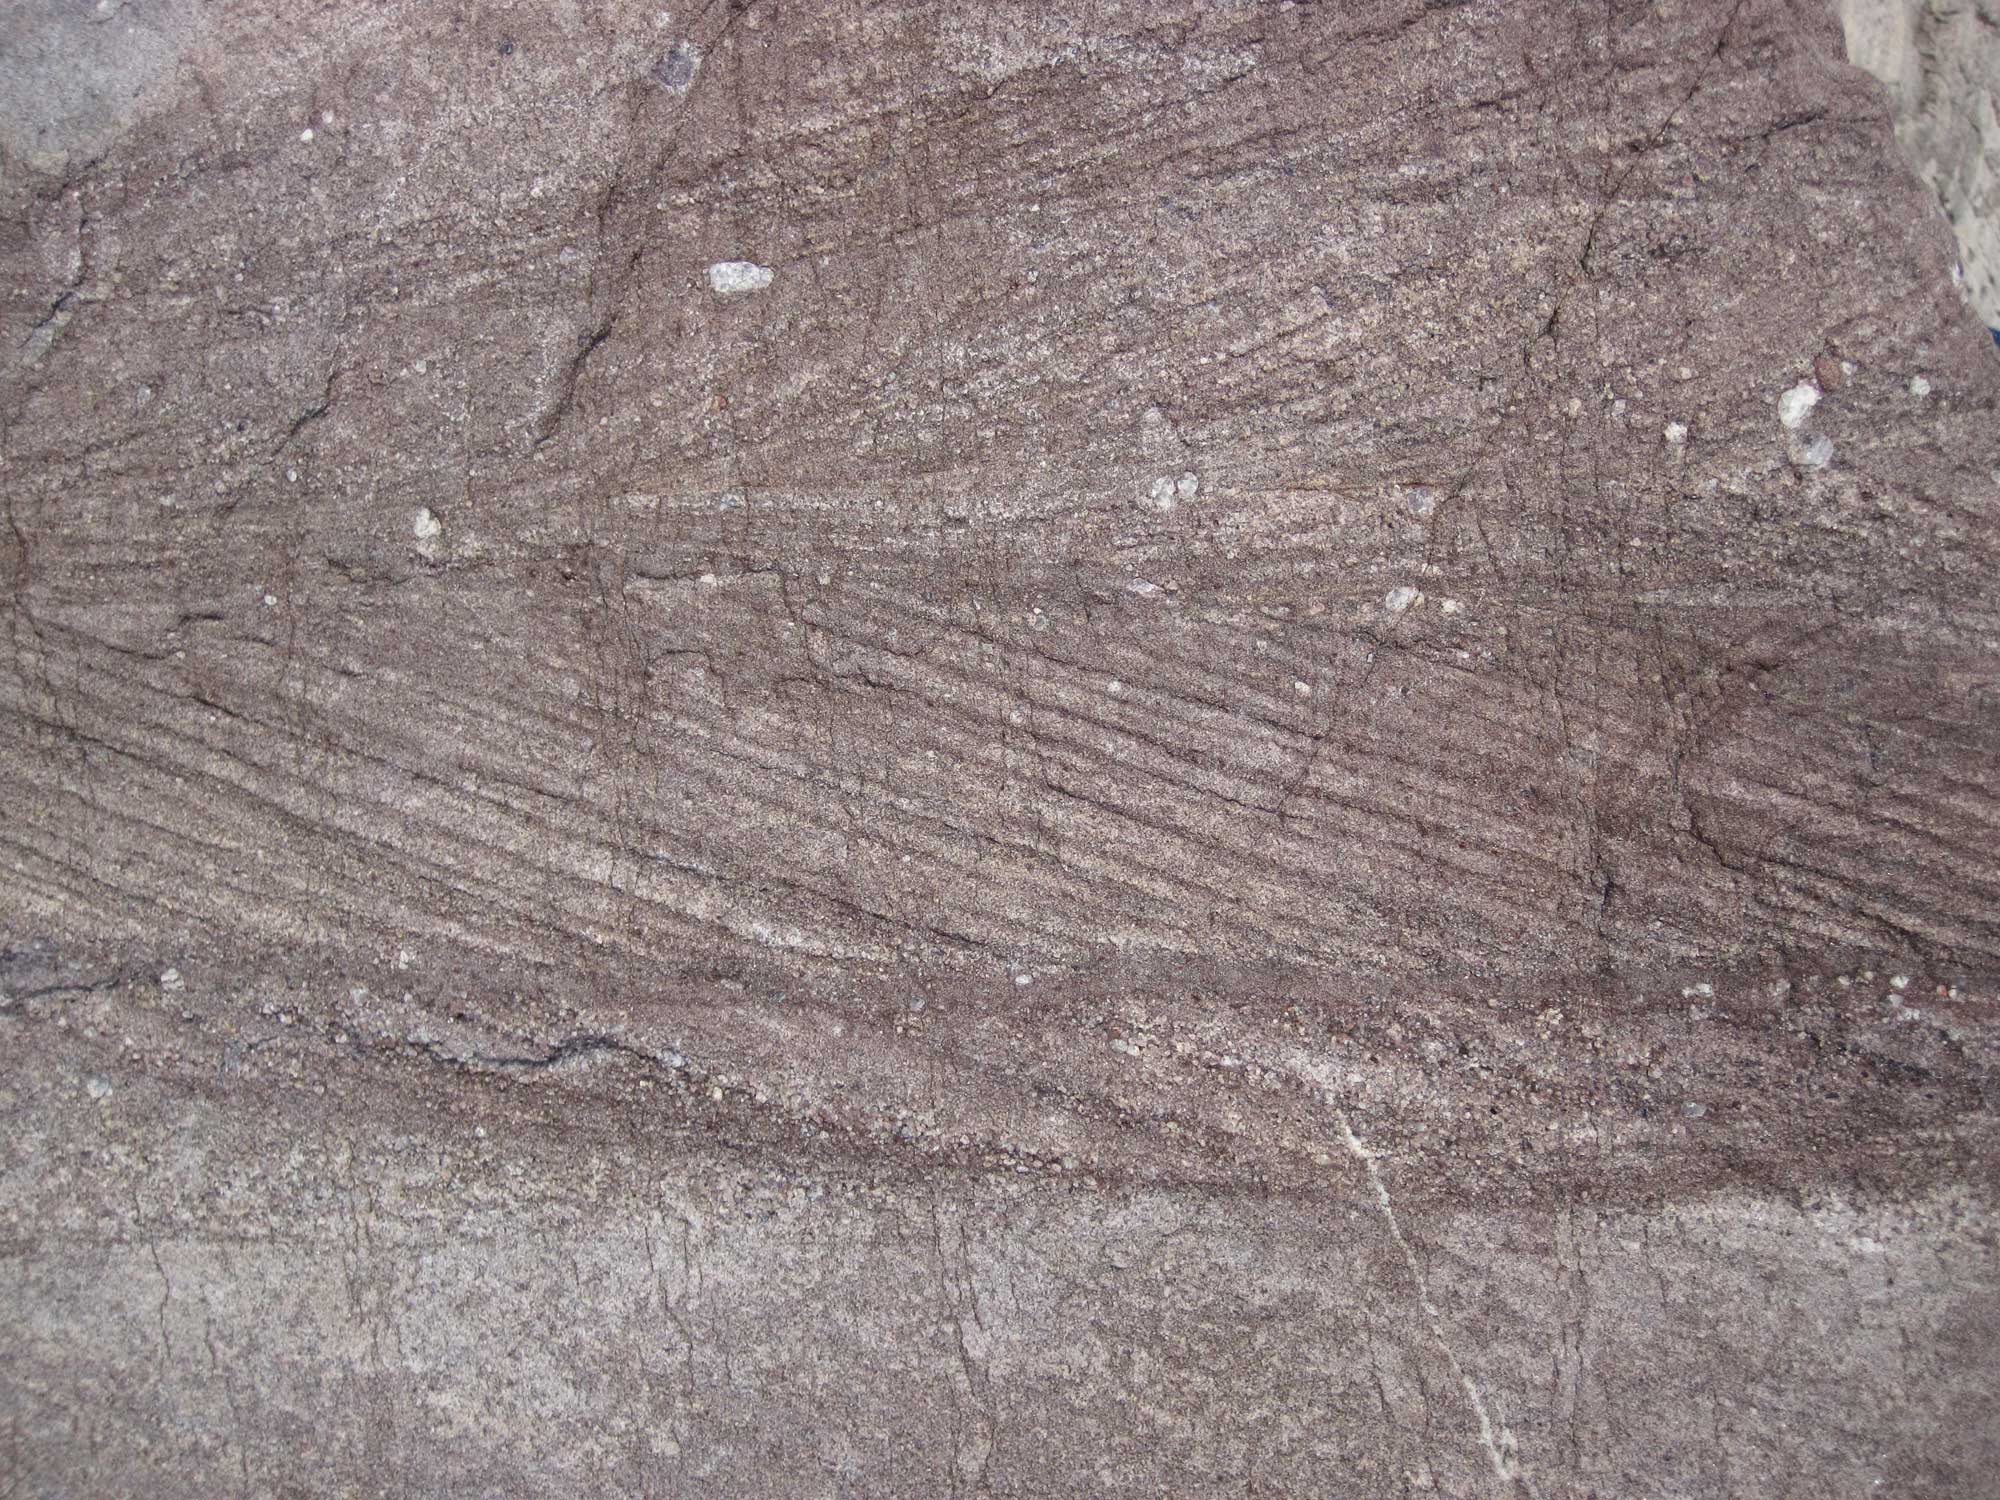 Close-up photograph of Baraboo Quartzite from Devil's Lake, Wisconsin. The photo shows a pinkish rock with cross-bedding.